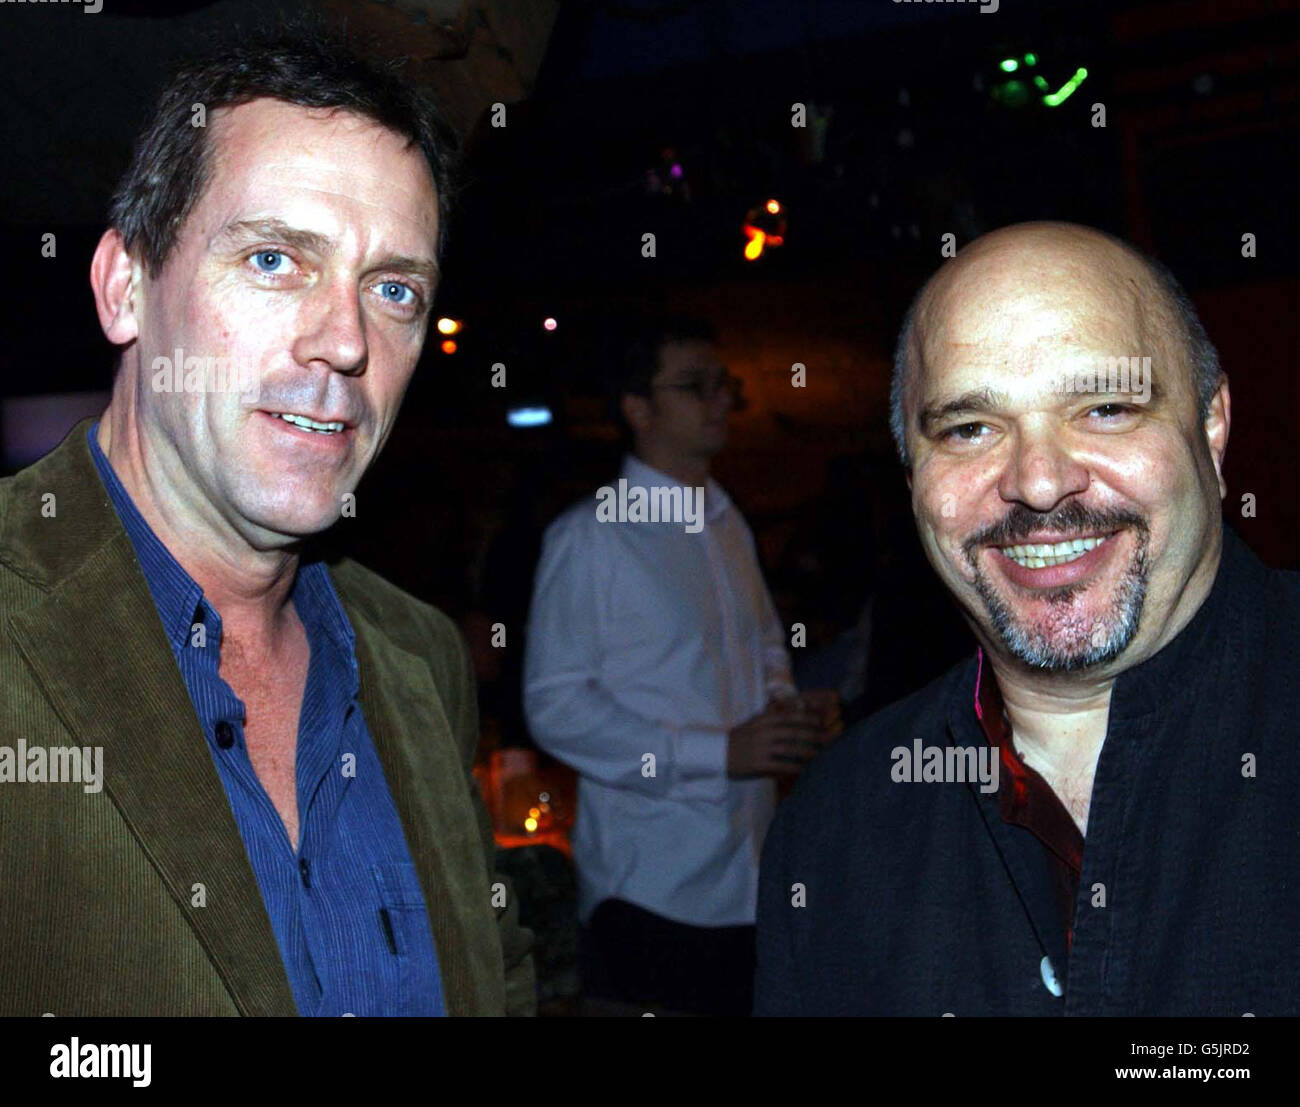 Actor Hugh Laurie (L) and director Anthony Minghella at the Oscar Moore Foundation Annual Film Quiz, at Sound in London, where the Oscar Moore Screenwriting Prize will be presented, this year's genre is Thriller. omsa Stock Photo